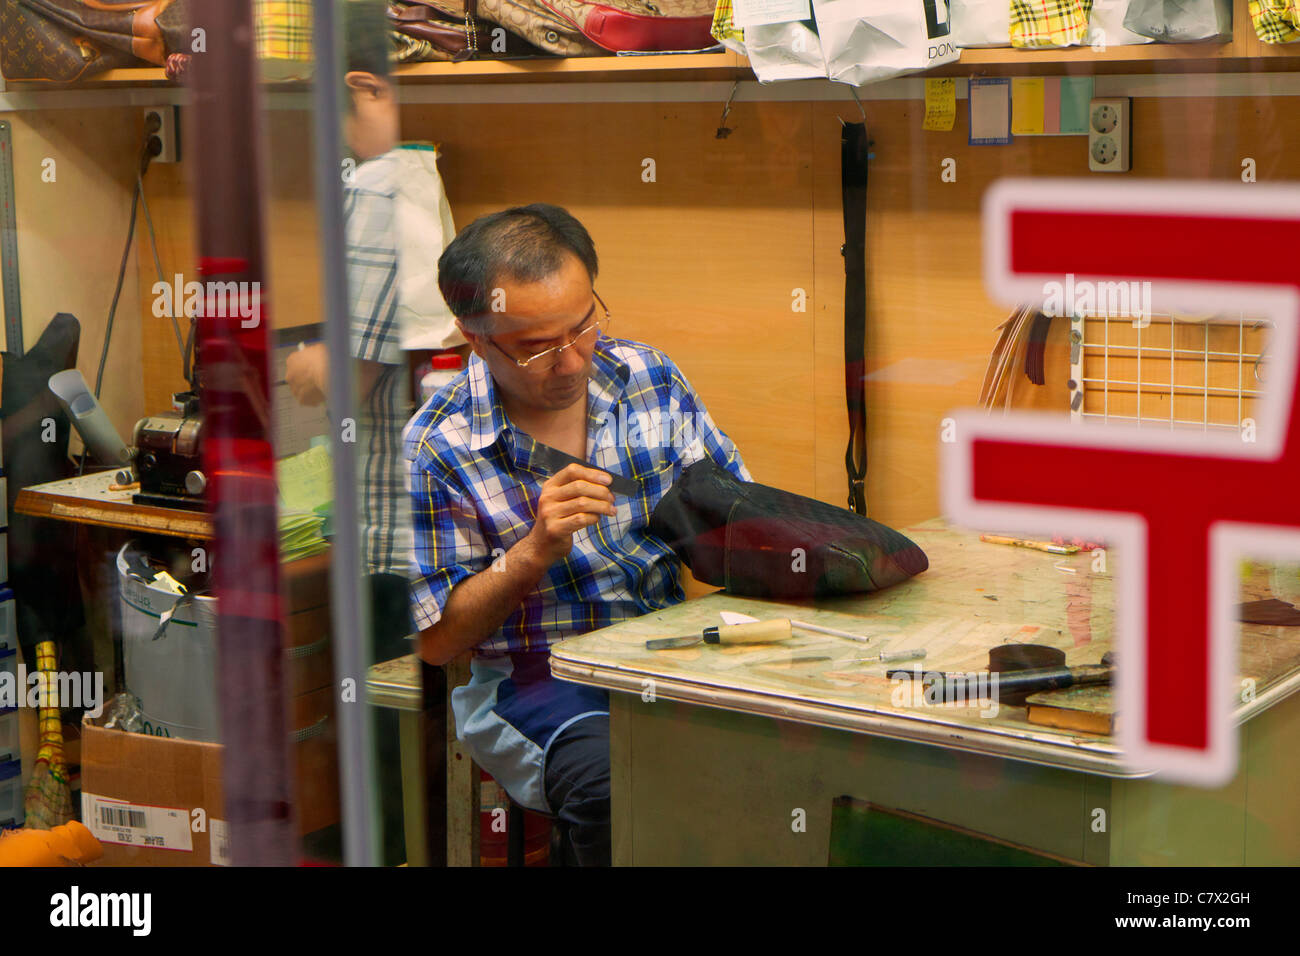 Skilled worker applies his trade in downtown Seoul Stock Photo